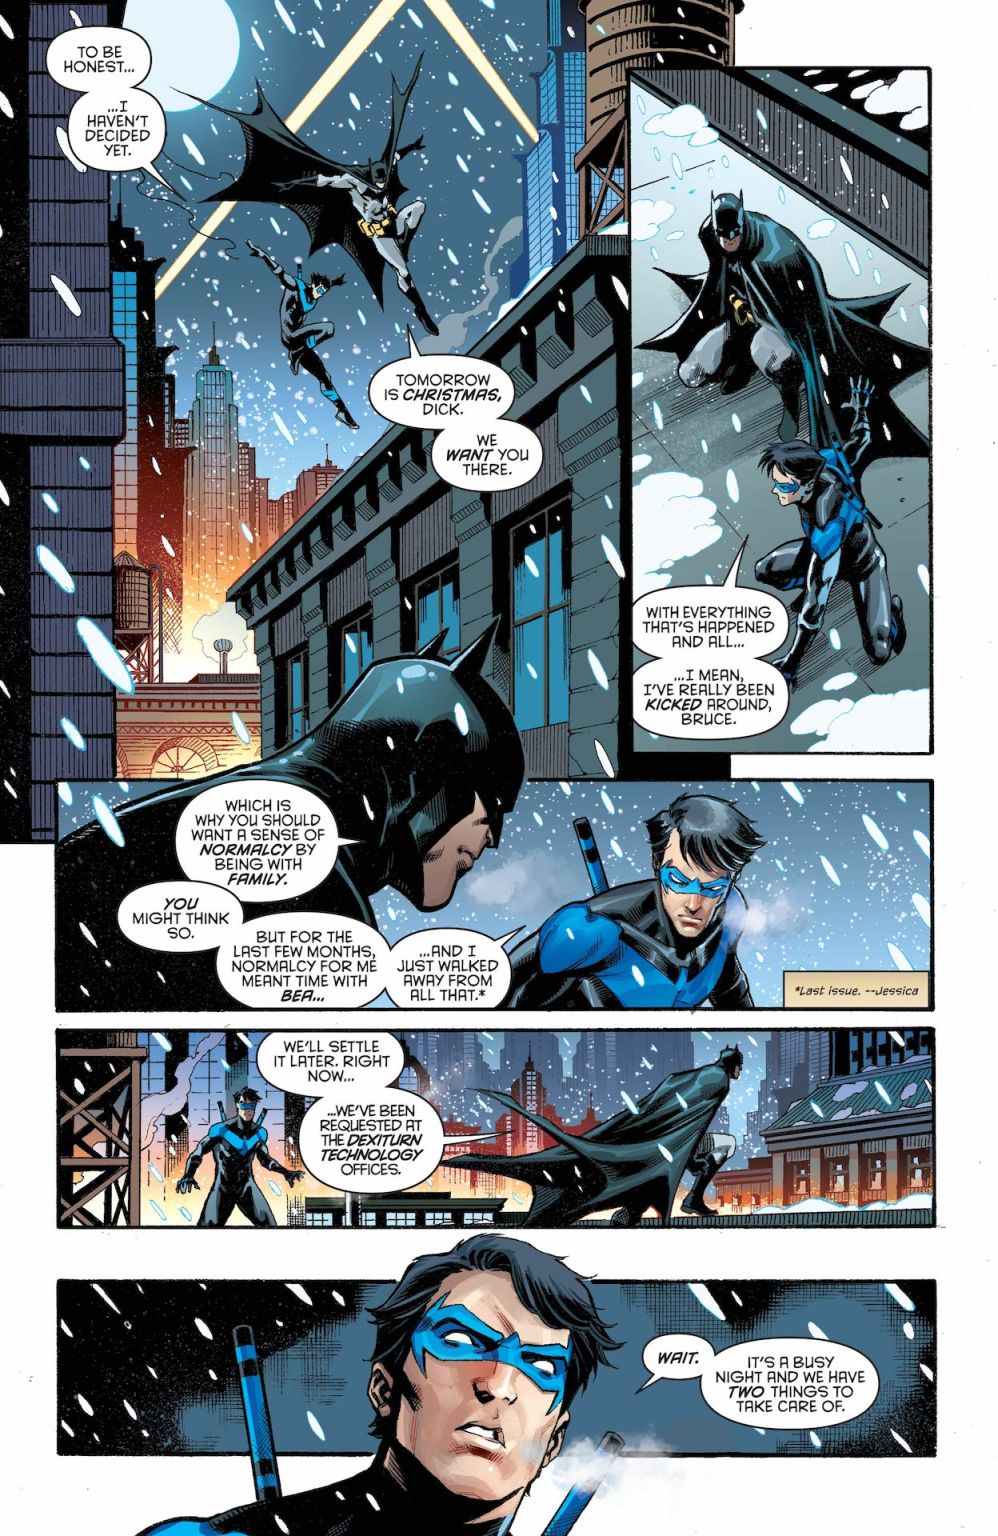 Nightwing #77 preview